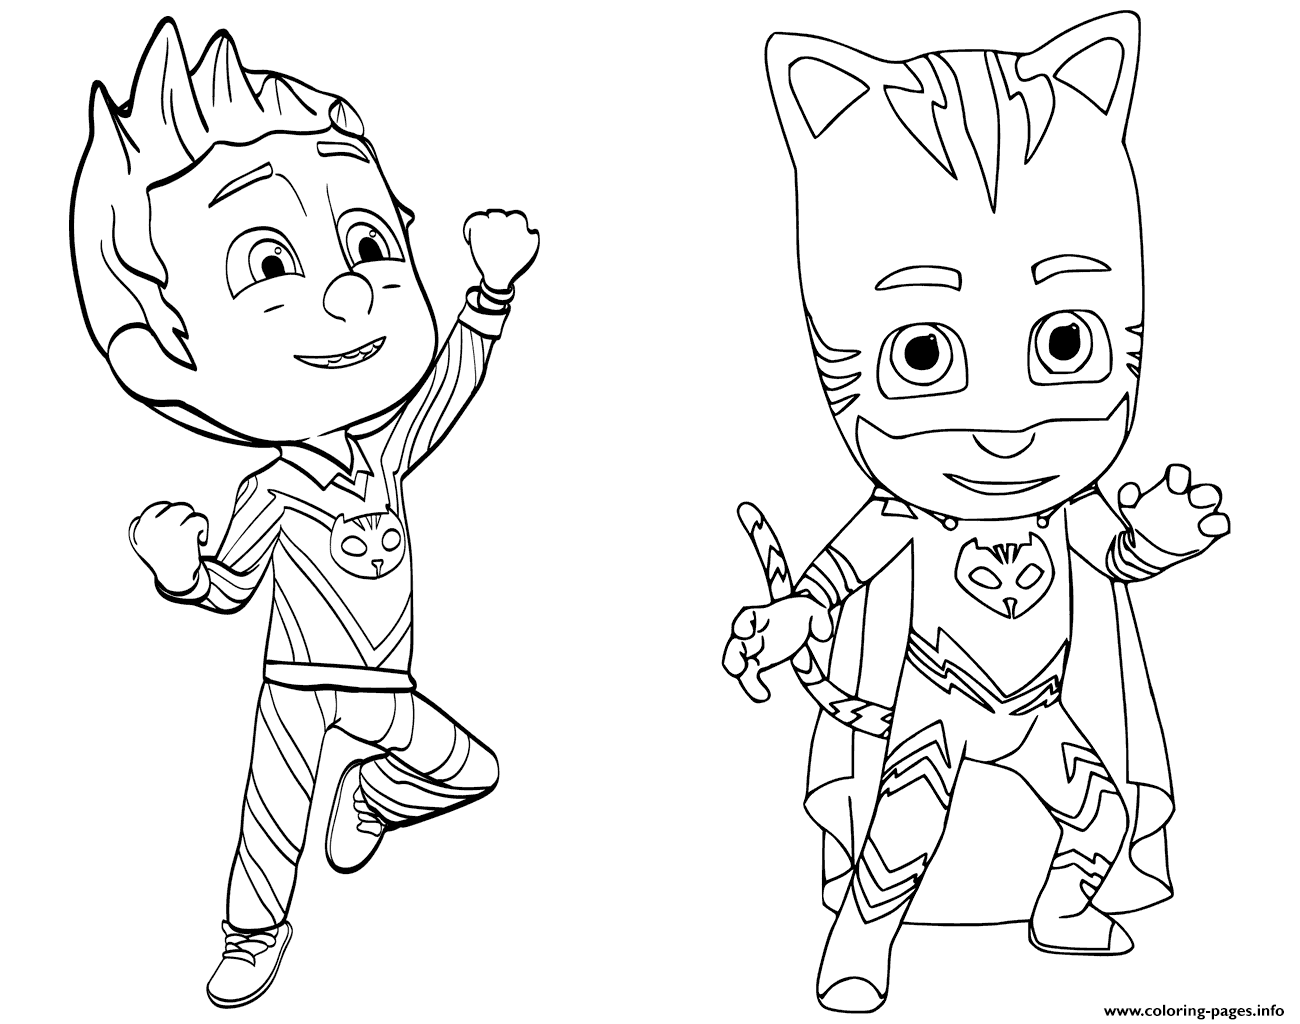 Pajama Hero Connor Is Catboy From PJ Masks coloring pages